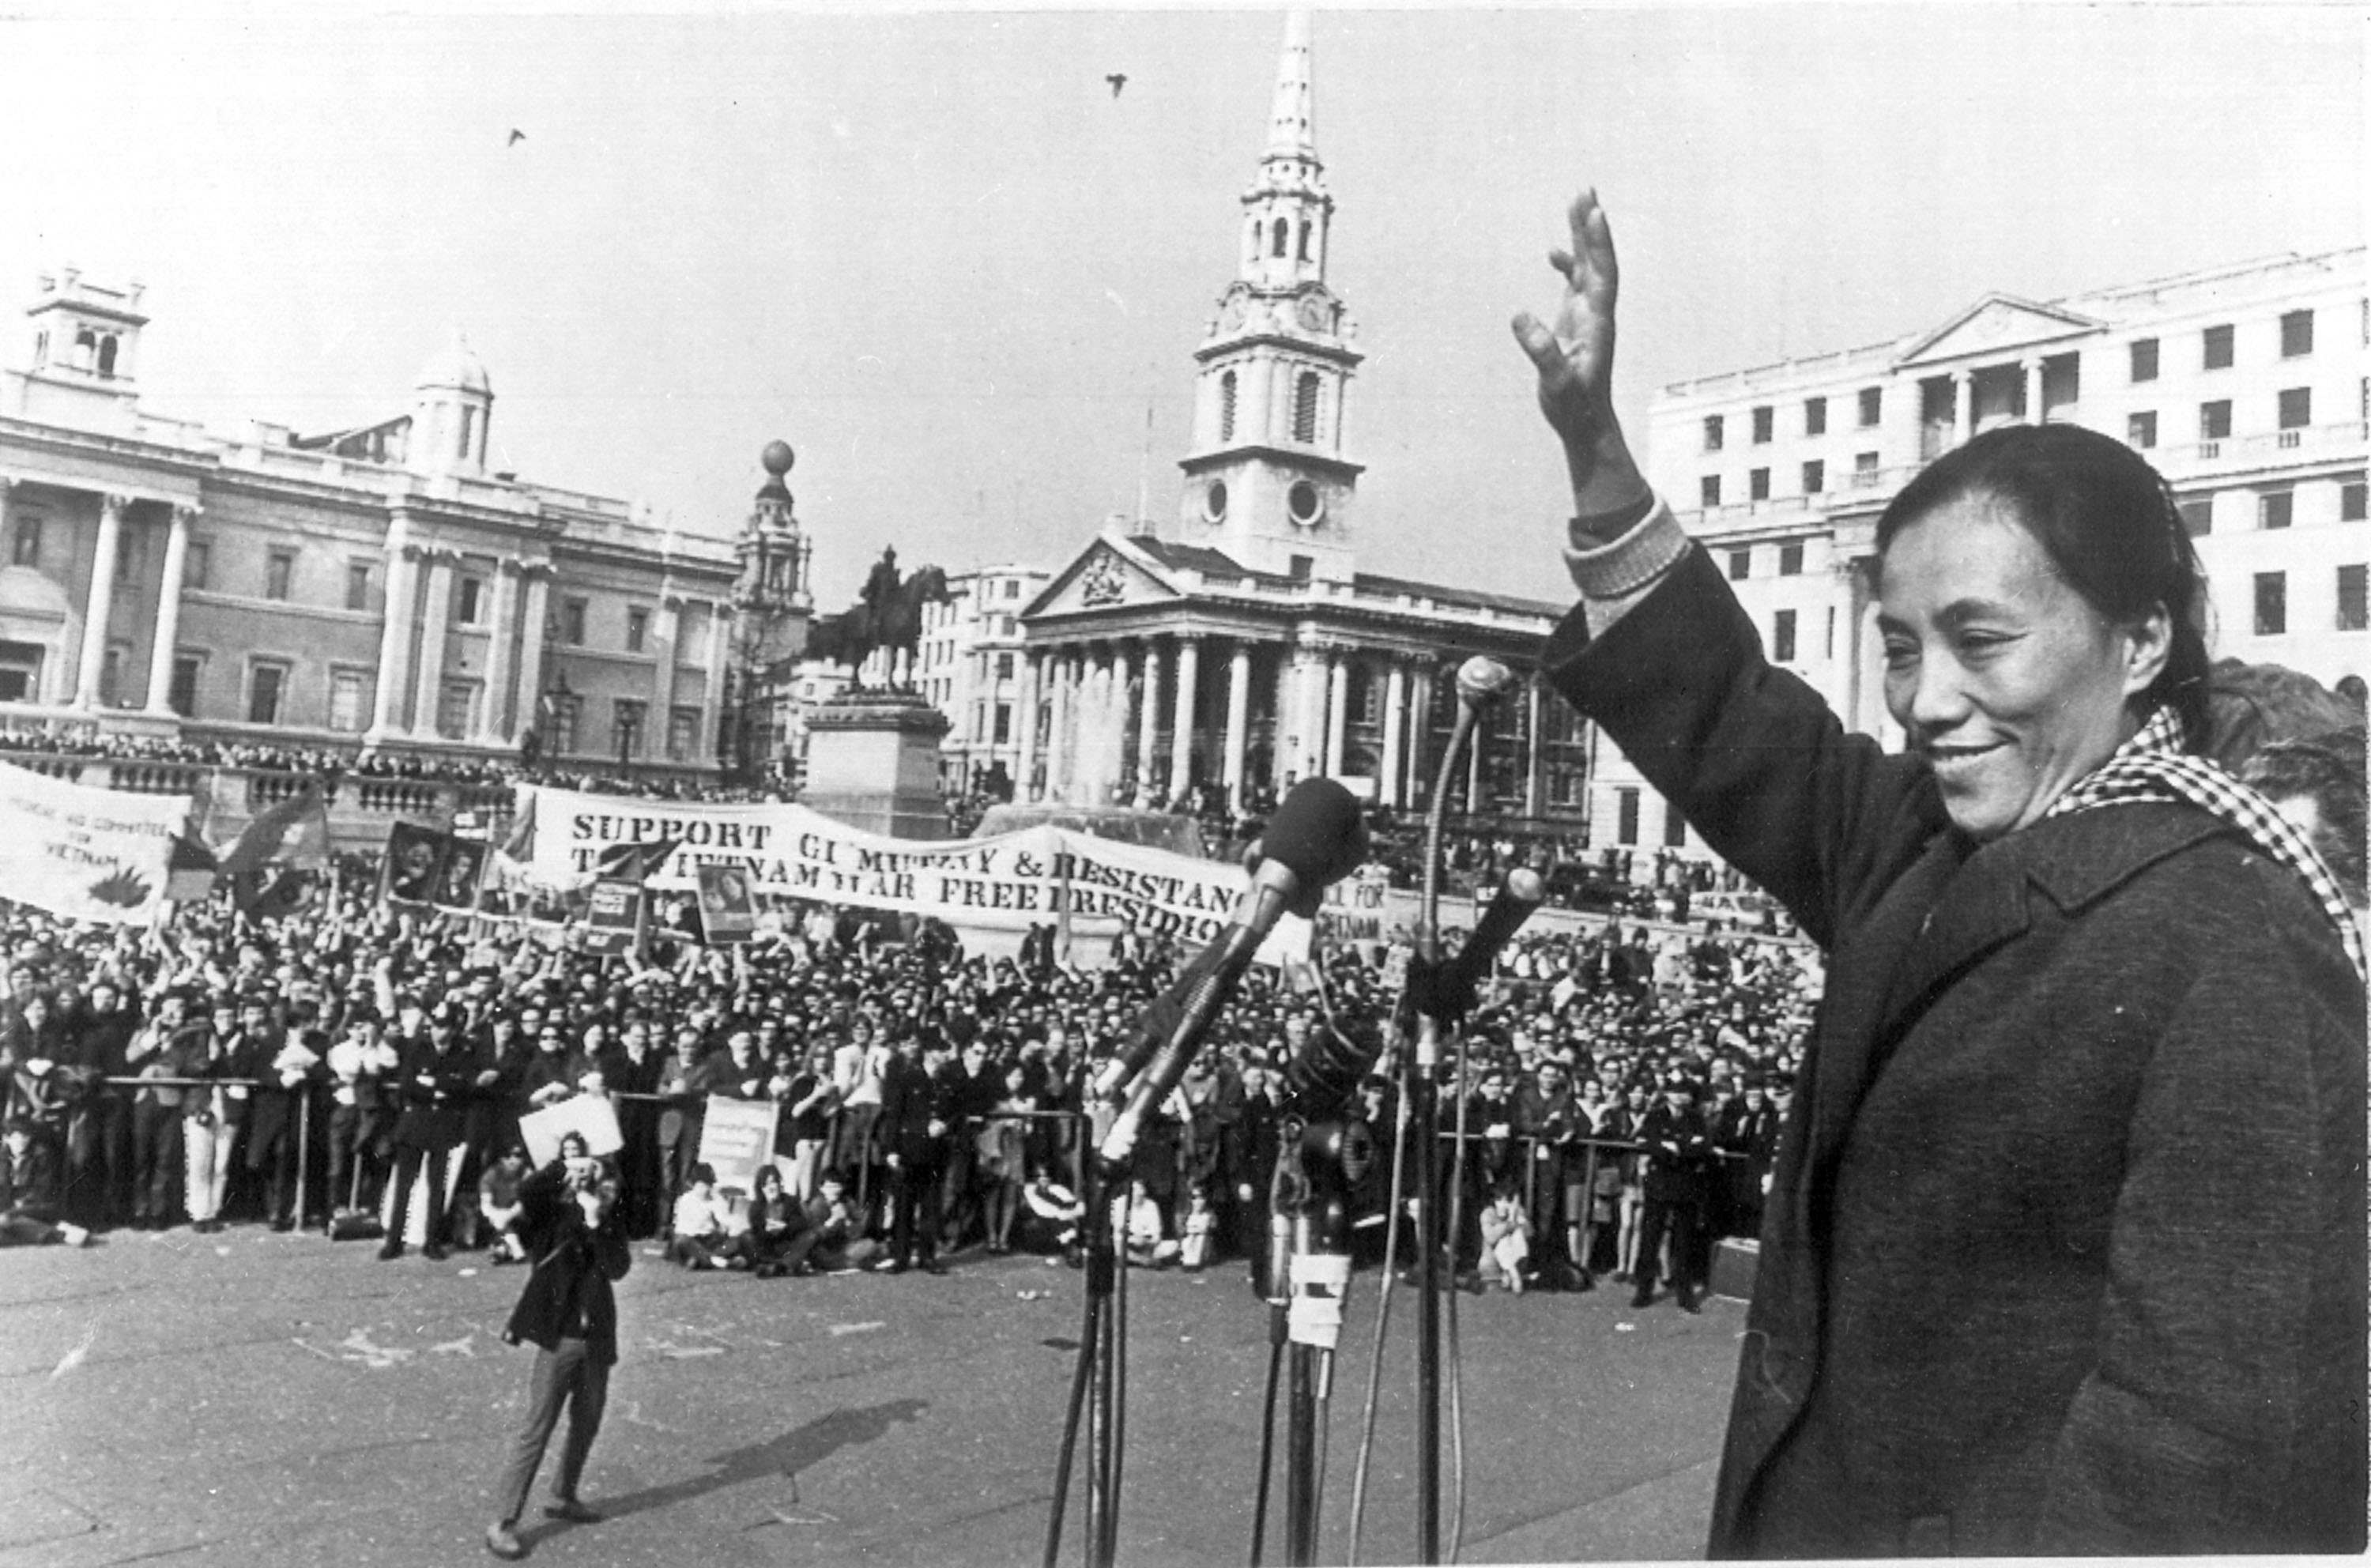 Madame Nguyen Thi Binh, deputy head of Vietnam's National Liberation Front delegation to the Paris peace talks, waves to the crowd gathered at London's Trafalgar Square, April 7, 1969. Several thousands of people attended the final stage of the annual Easter March from Cardiff to London, organized by the Campaign for Nuclear Disarmament, CND. Binh joined the march on the outskirts of London, accompanied by members of the British parliament. (AP Photo)